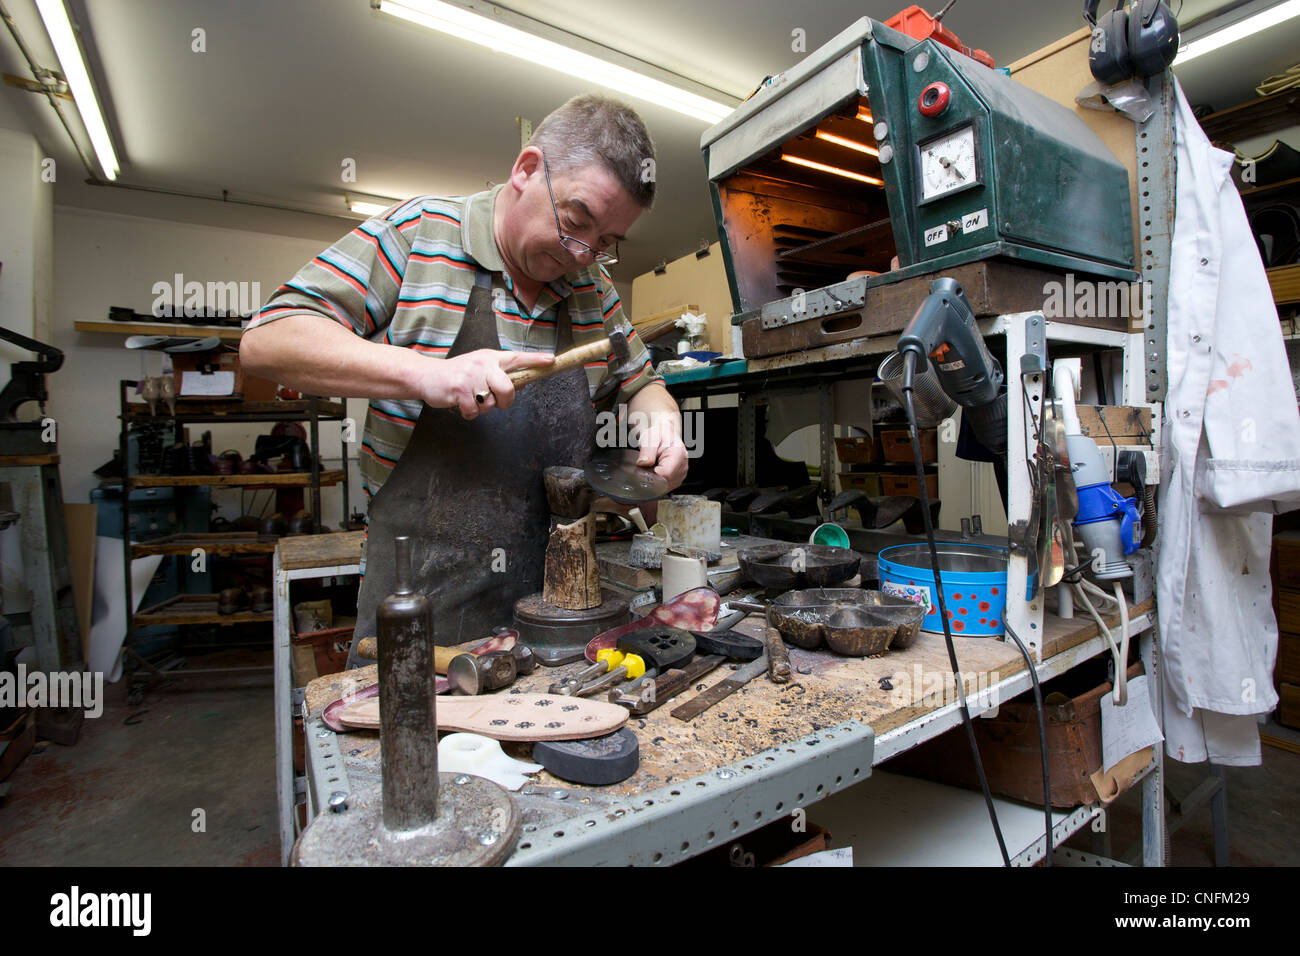 Cobbler working on the making of a shoe. Stock Photo